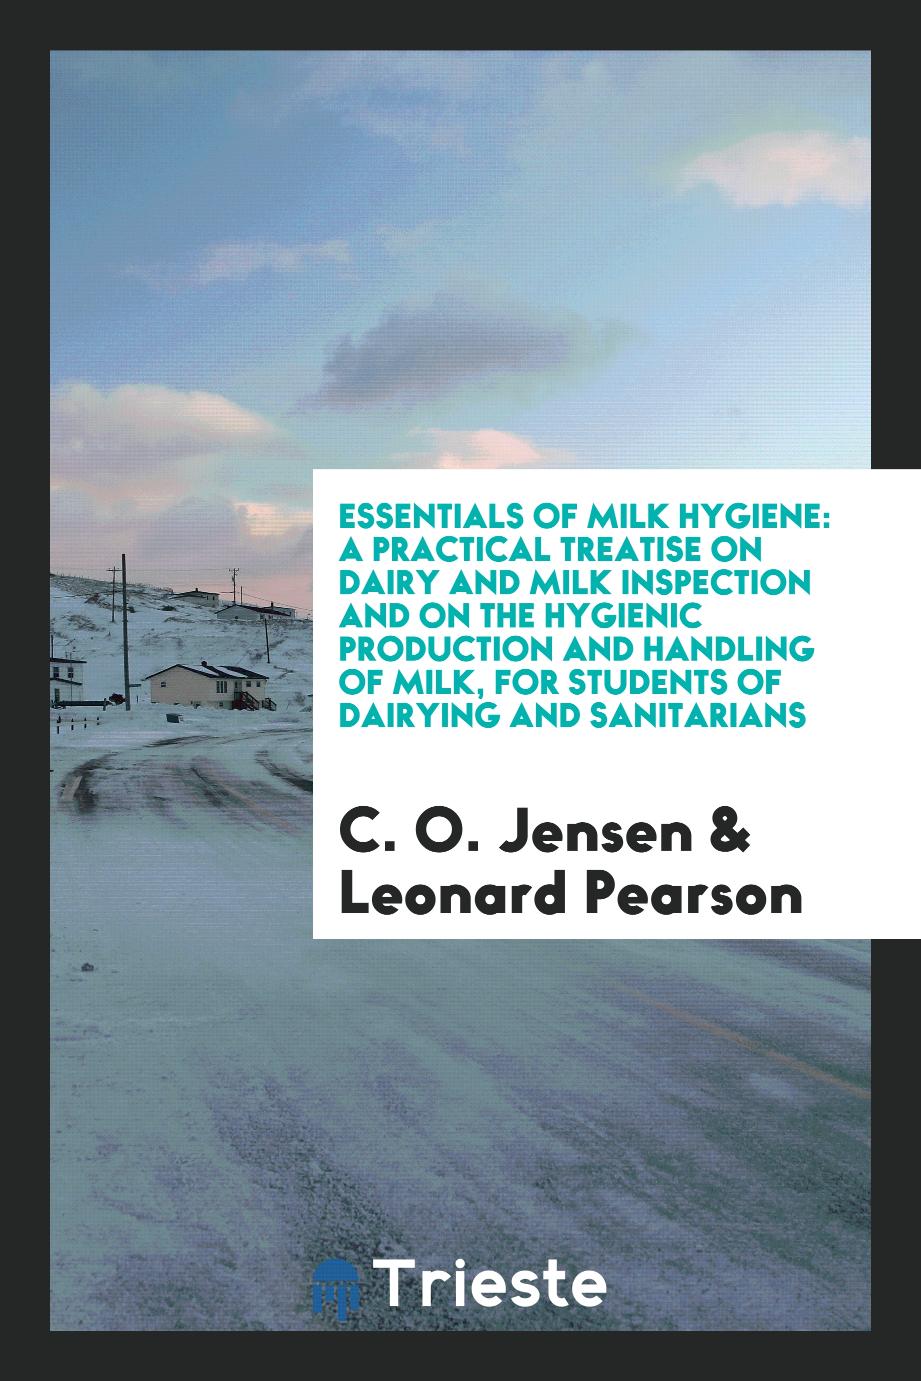 Essentials of milk hygiene: a practical treatise on dairy and milk inspection and on the hygienic production and handling of milk, for students of dairying and sanitarians